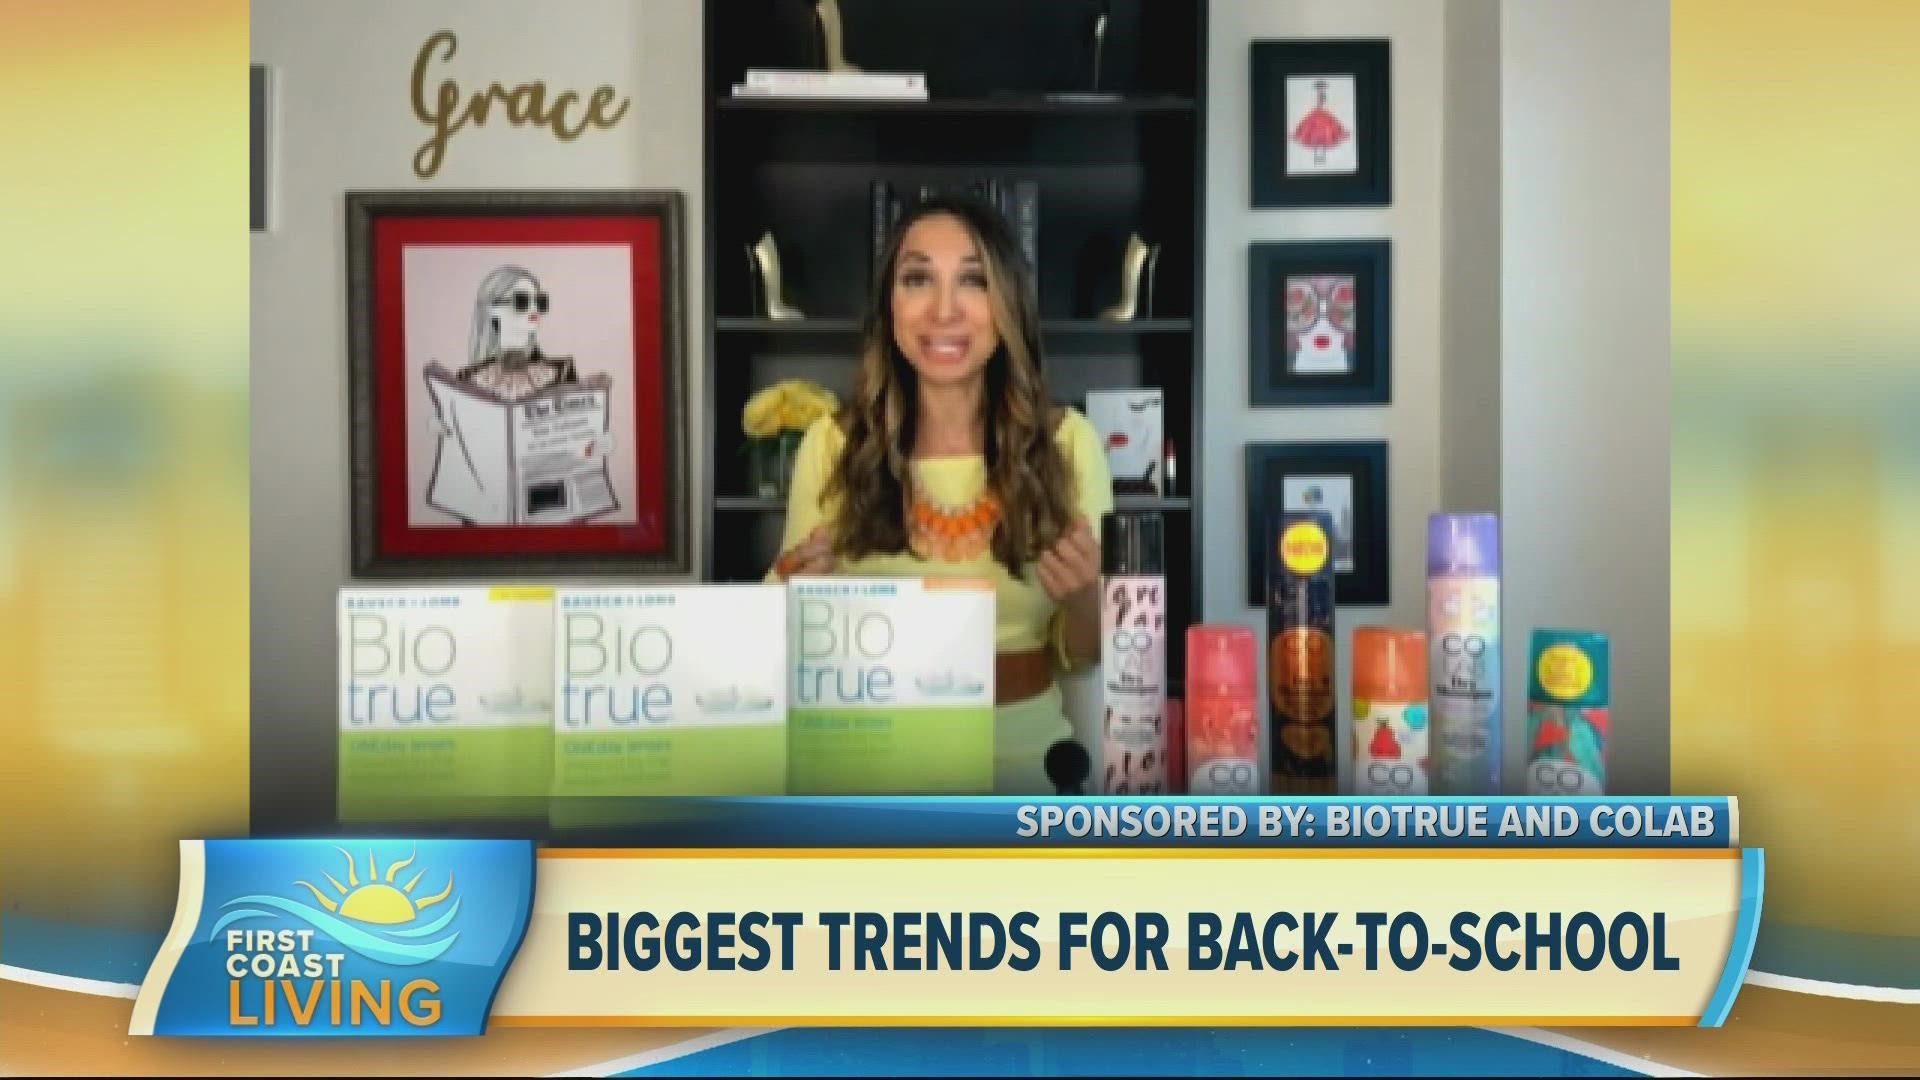 Beauty and Lifestyle consultant, Grace Gold shares this season’s top back-to-school trends - from hairstyles and fashion to makeup.